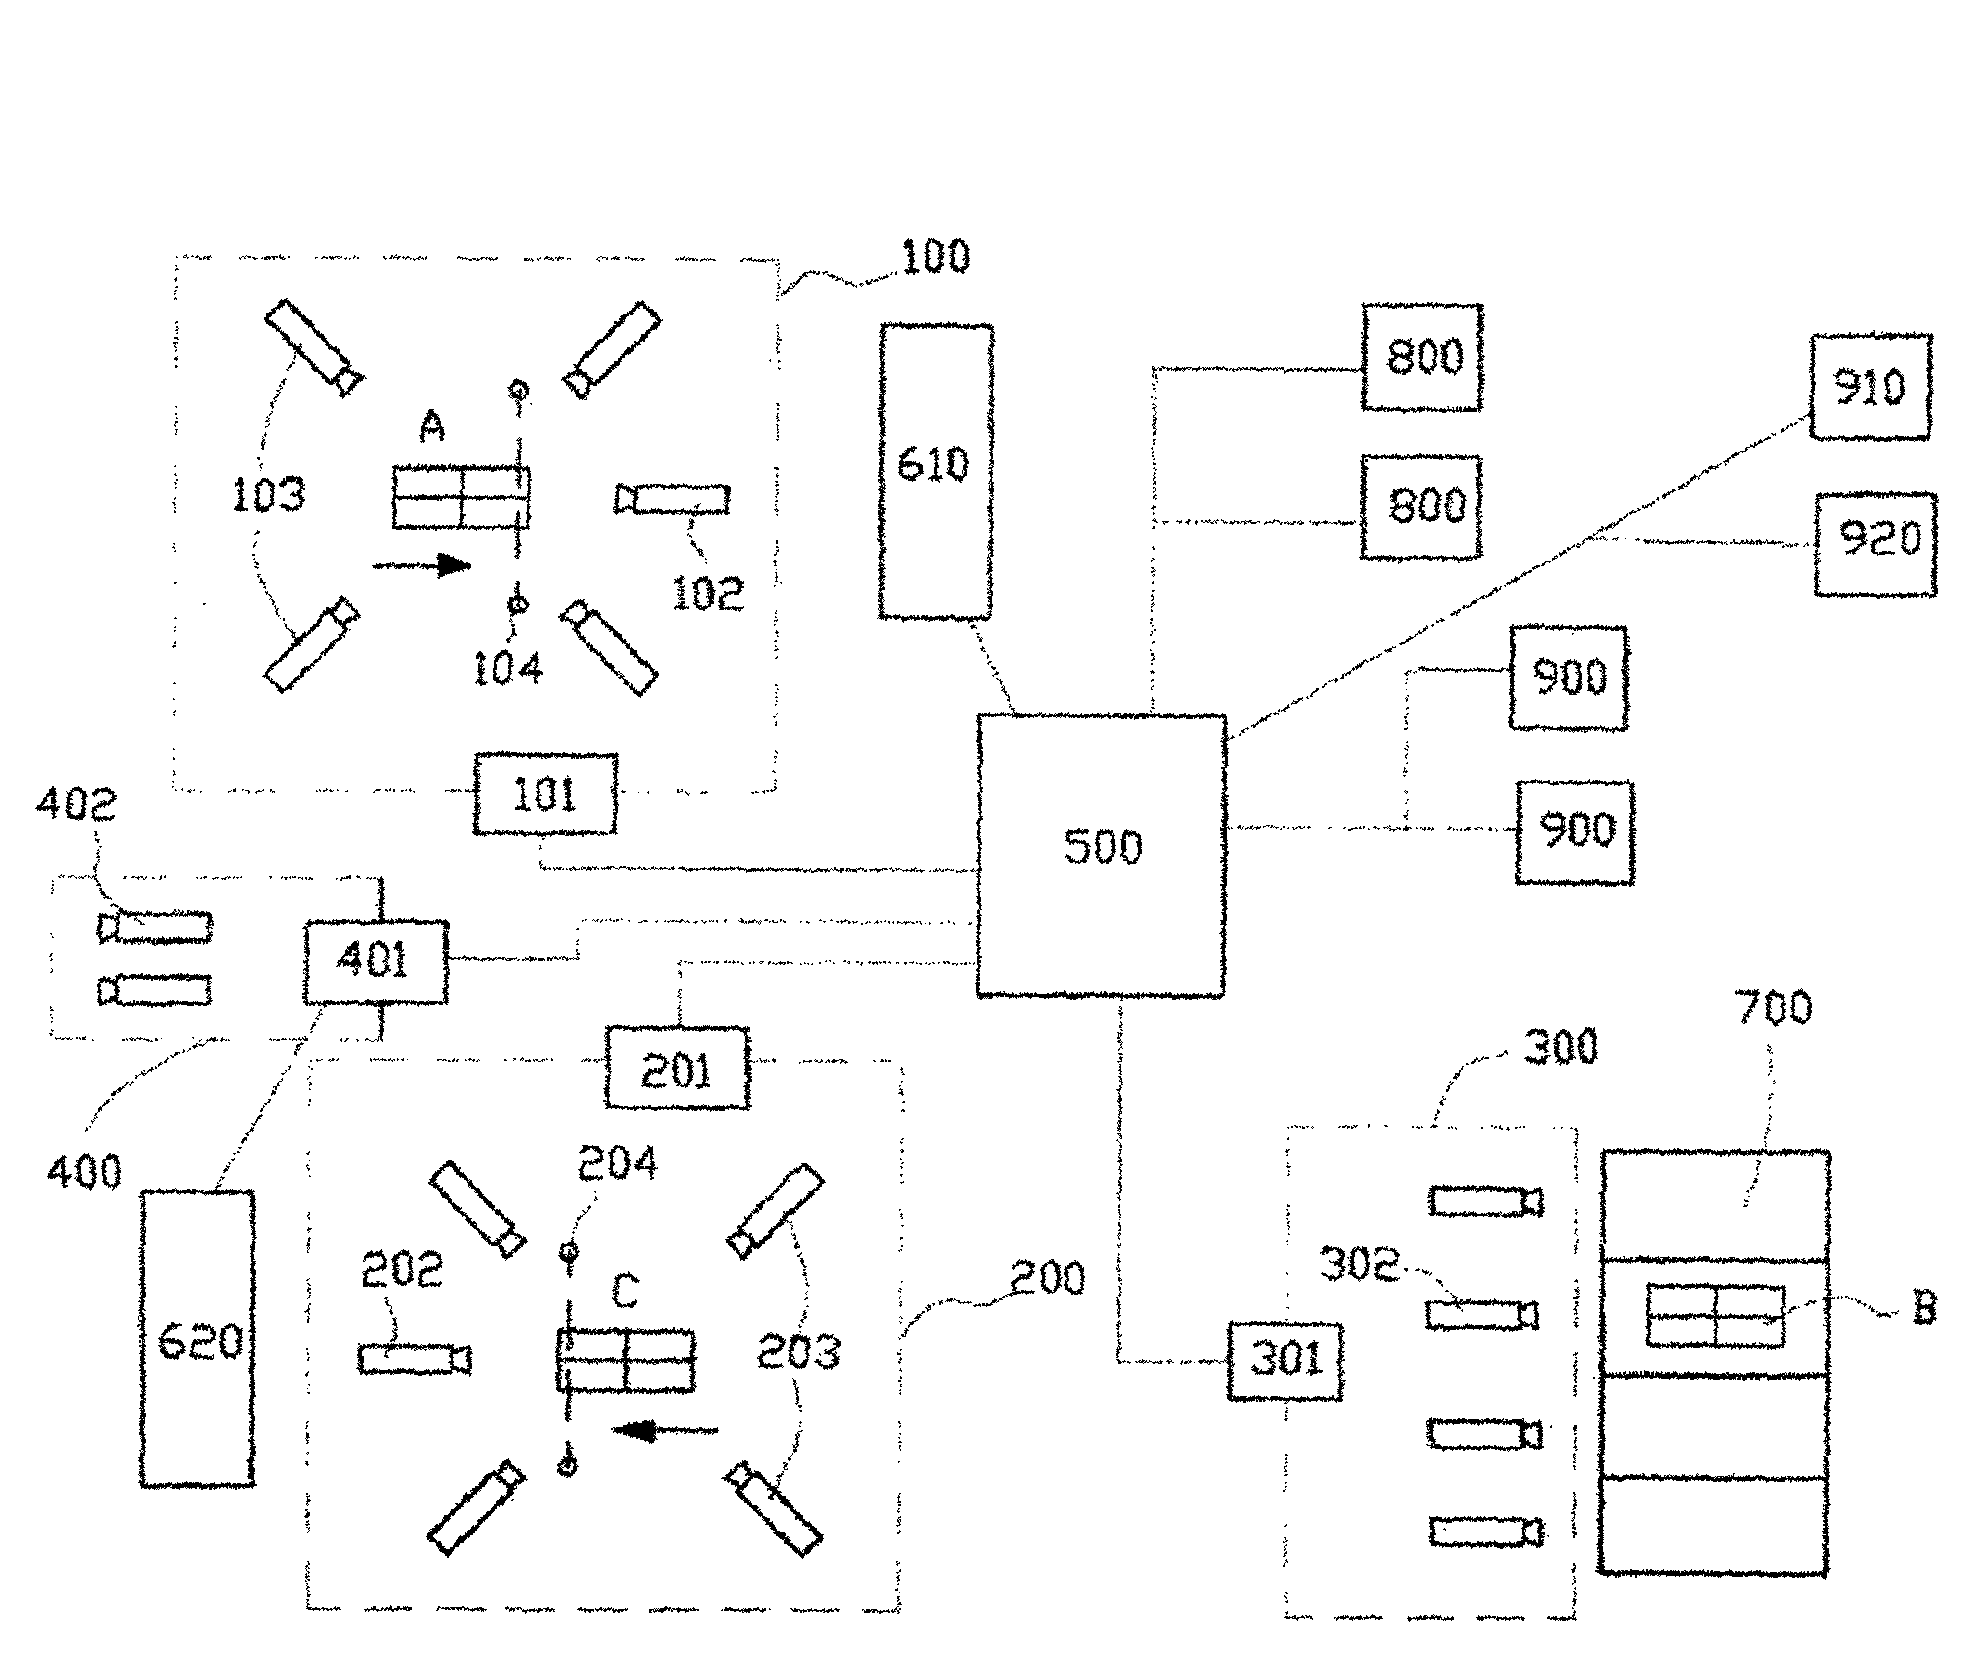 Parking control system and method